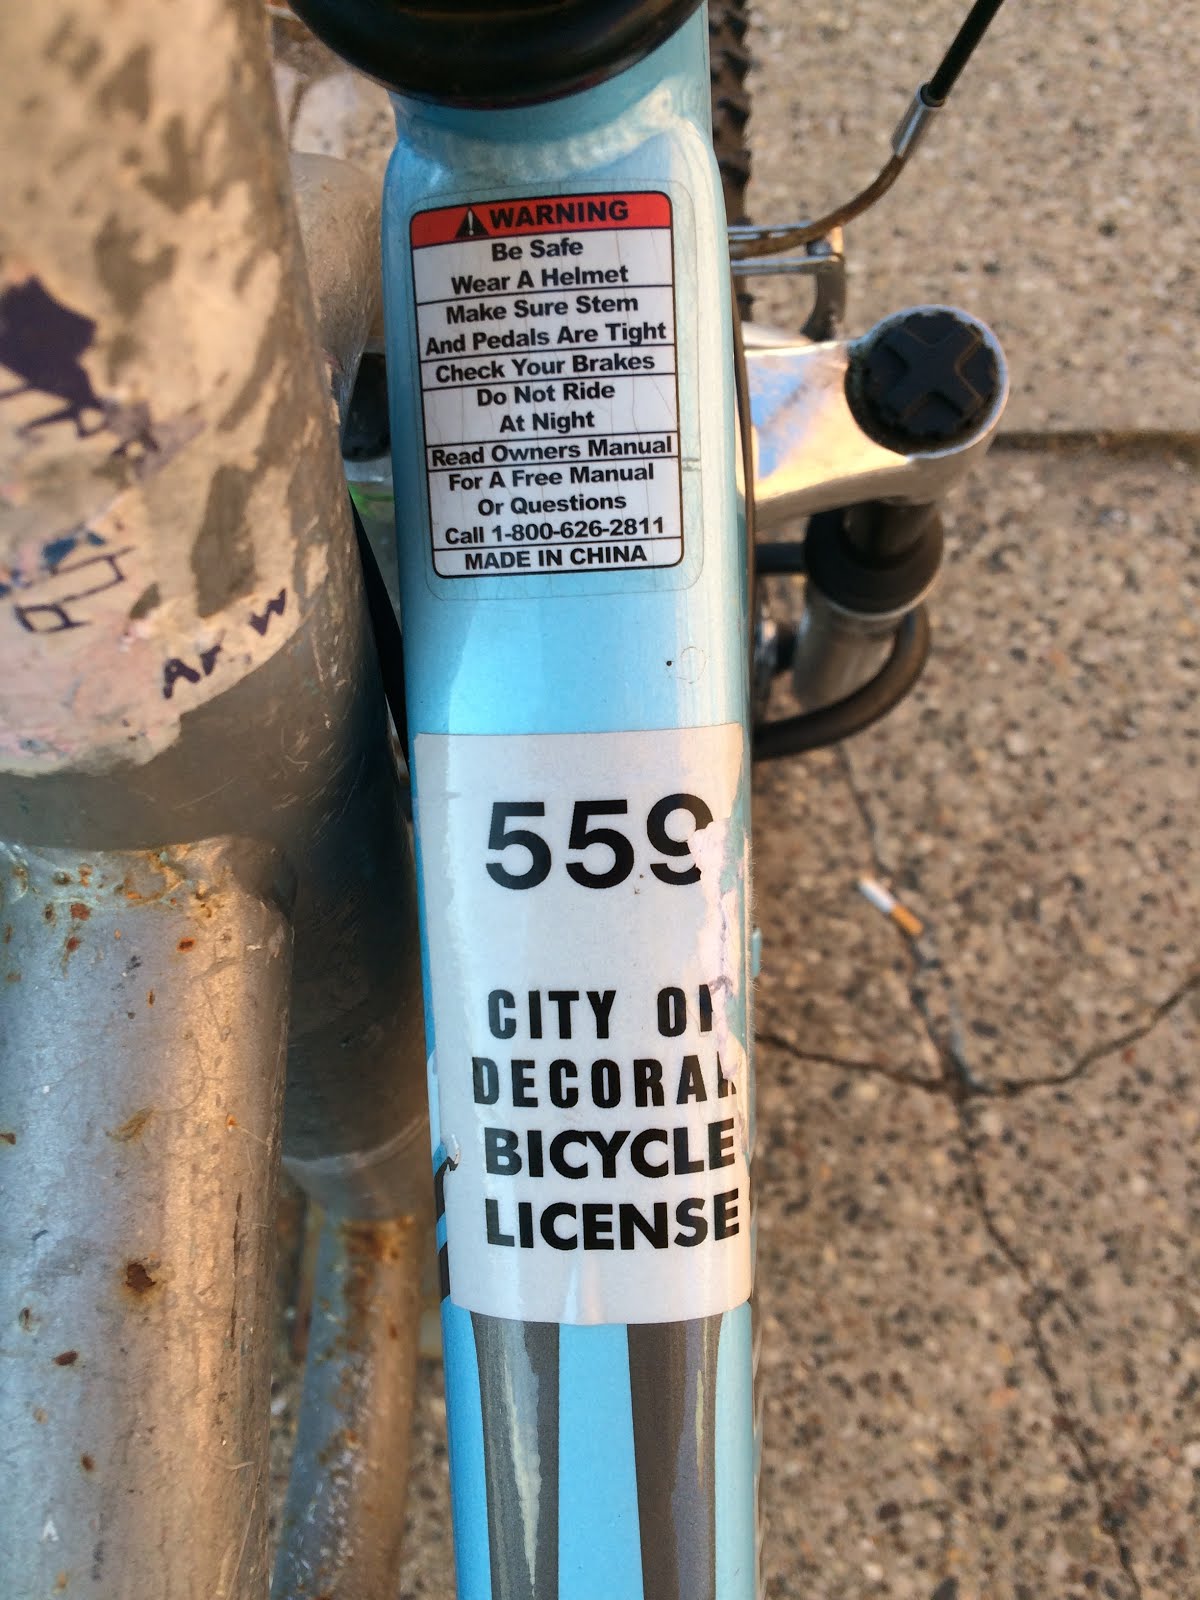 Decorah, IA has required bike registration and licensing since 1948.